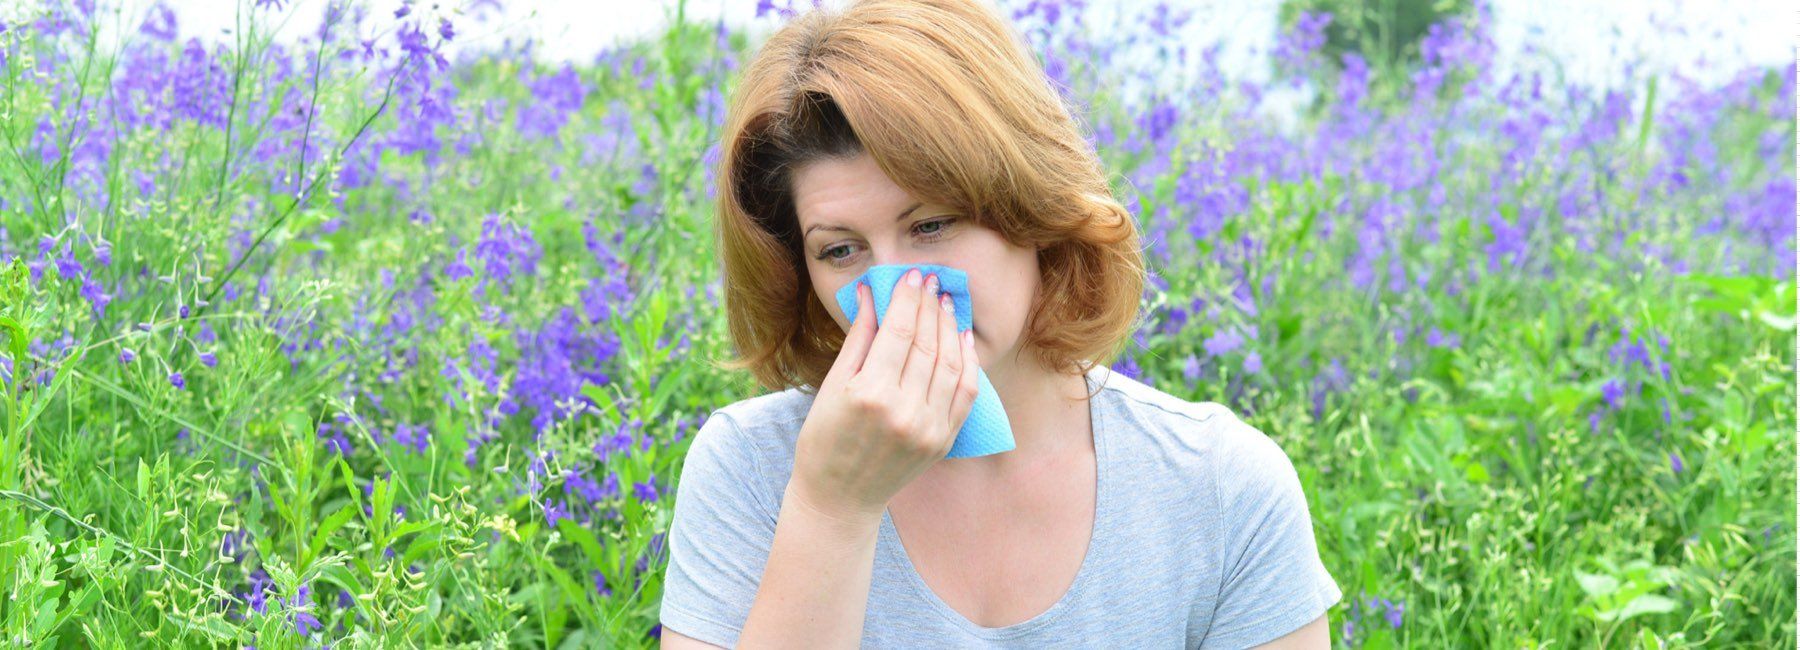 Woman blowing nose in a field of flowers